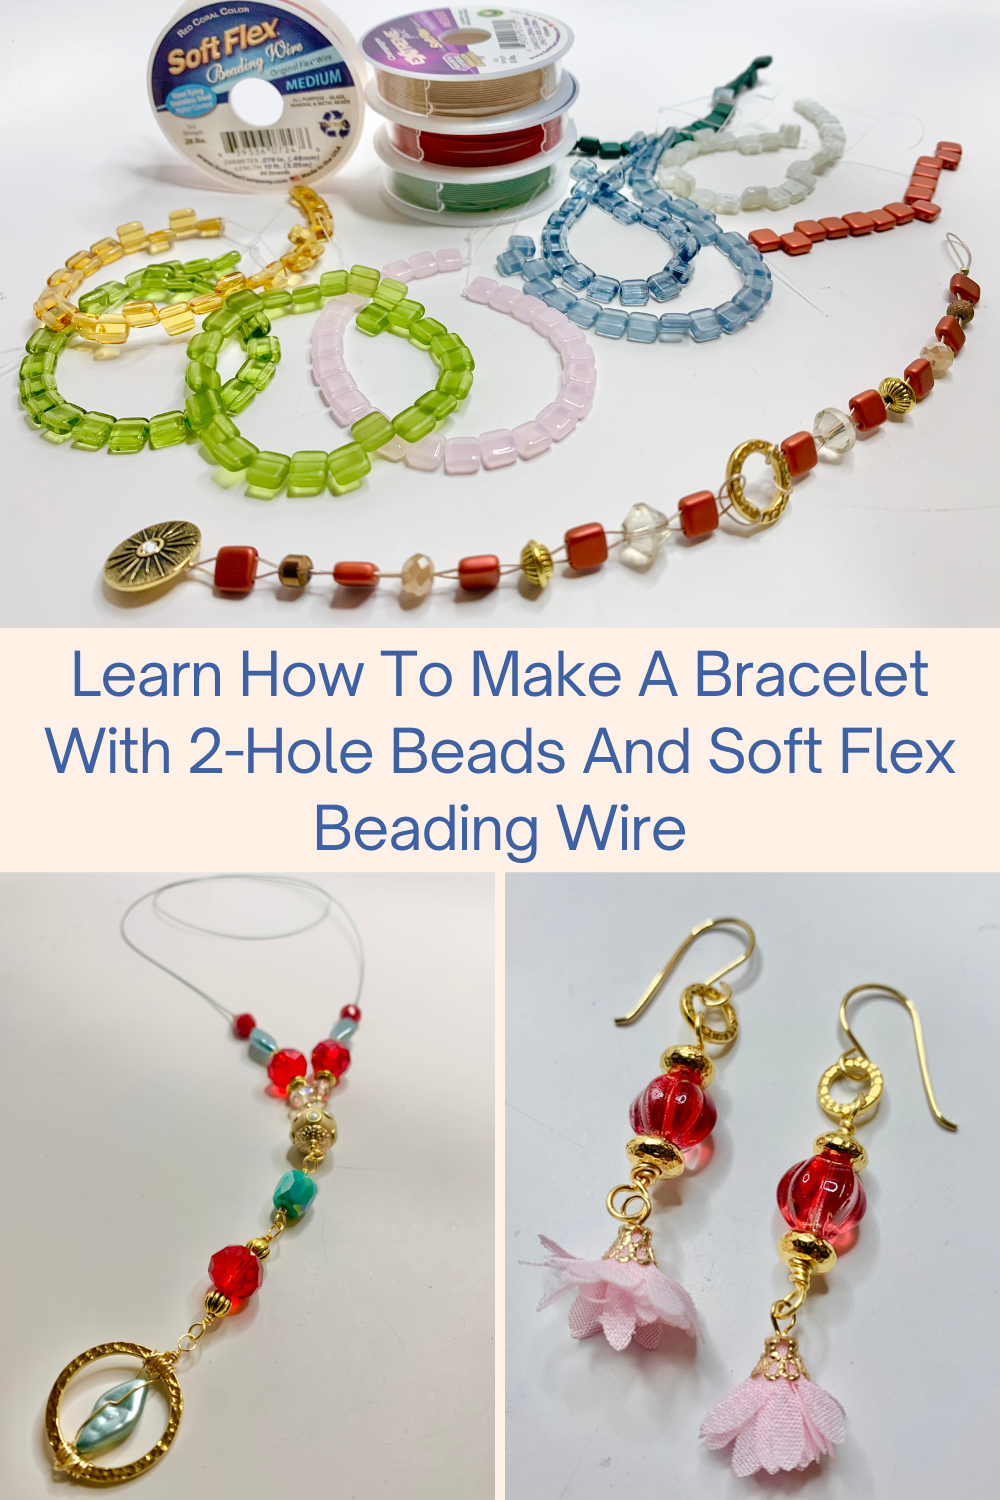 Learn How To Make A Bracelet With 2-Hole Beads And Soft Flex Wire Collage